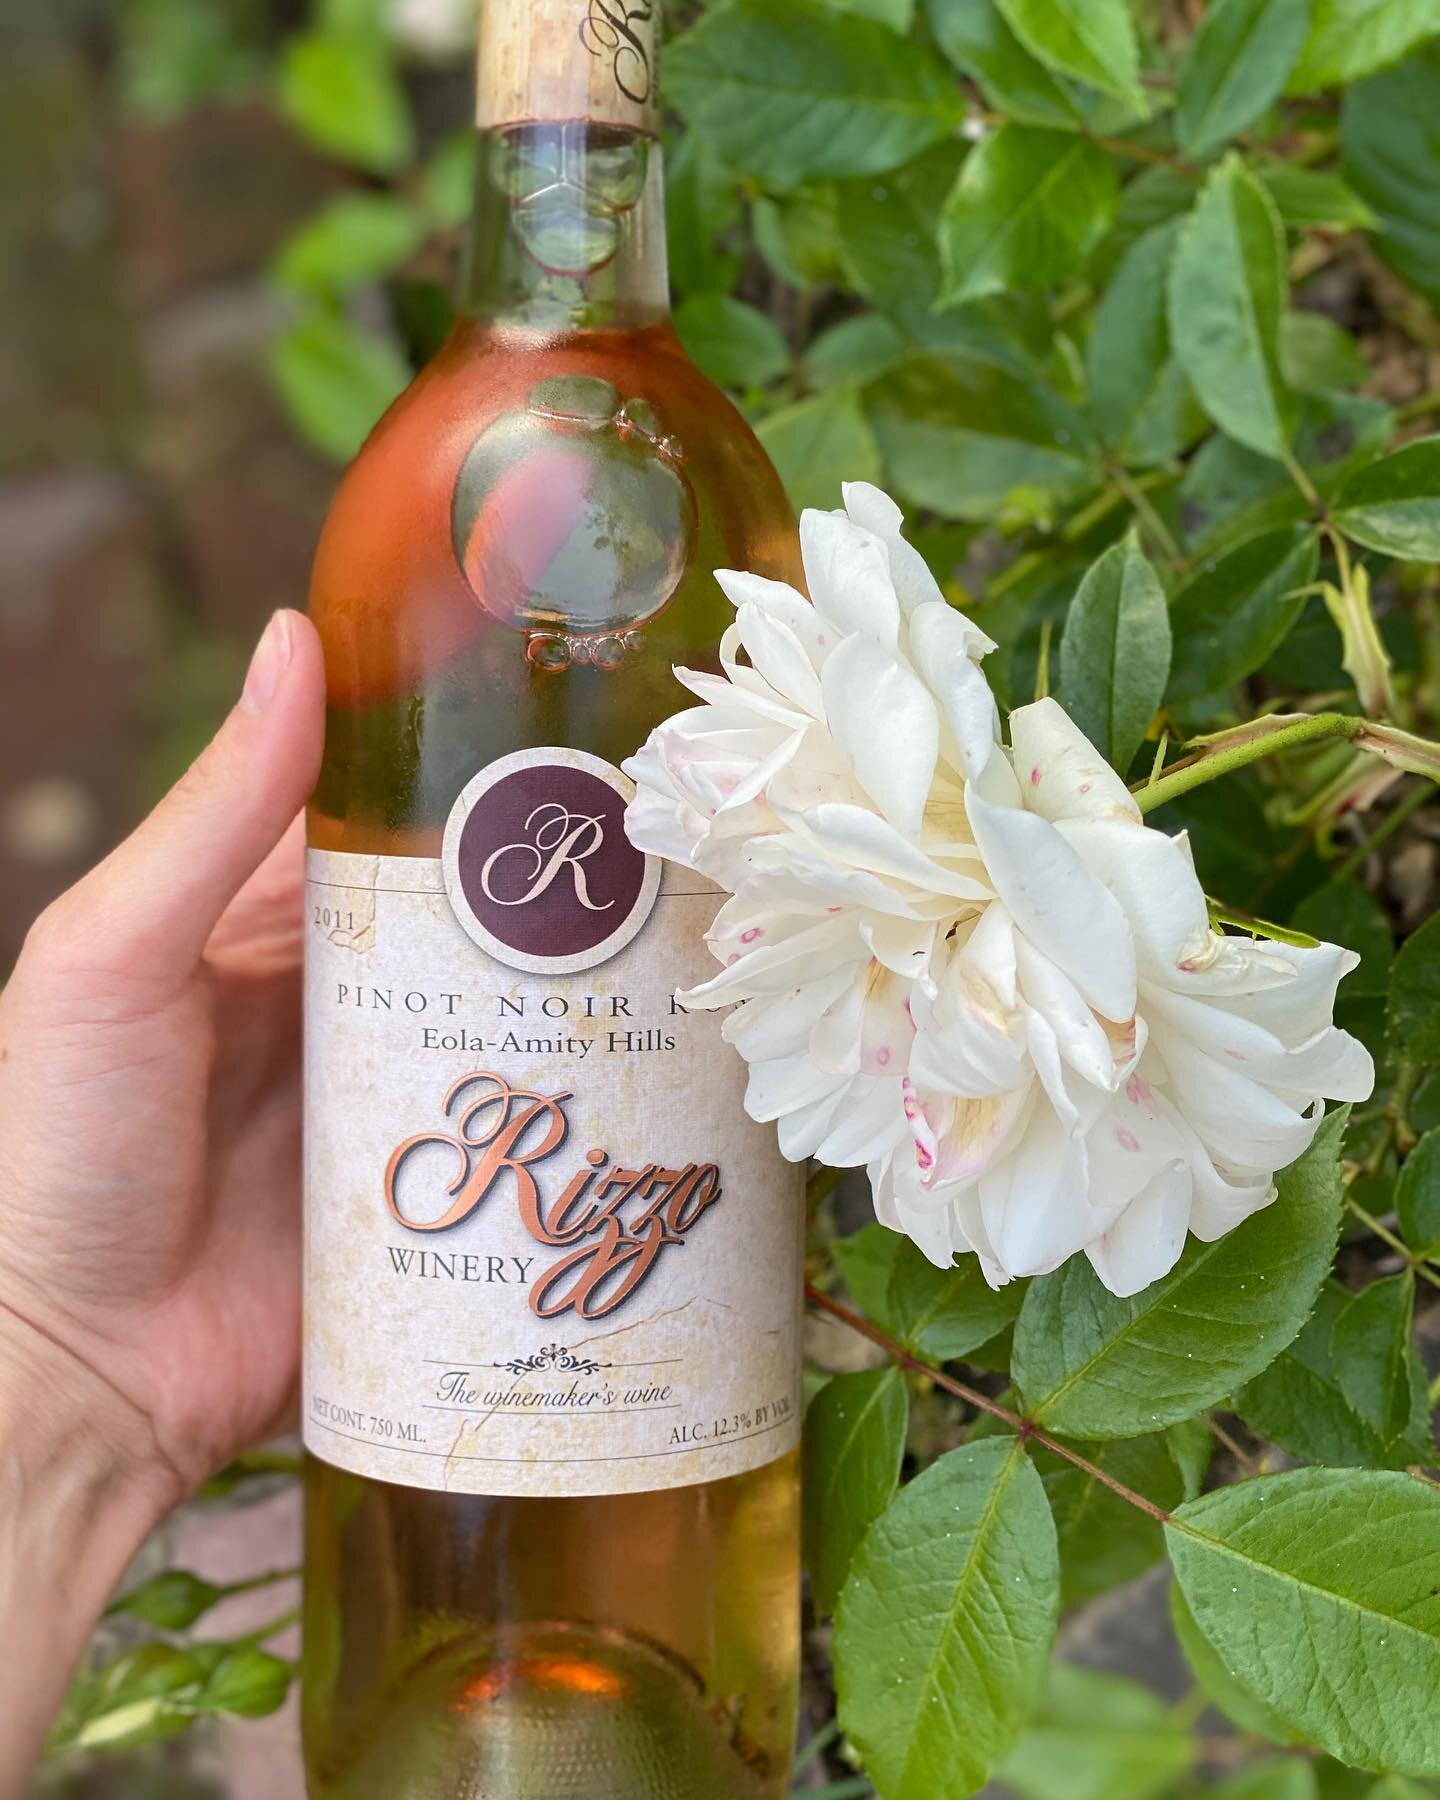 Spring is here, which means warm weather is right around the corner! Don&rsquo;t miss out on our incredible ros&eacute; case special 🎉

Get a case of our 2011 Pinot Noir Ros&eacute; for $99. That&rsquo;s only $8.25 per bottle, making this wine even 